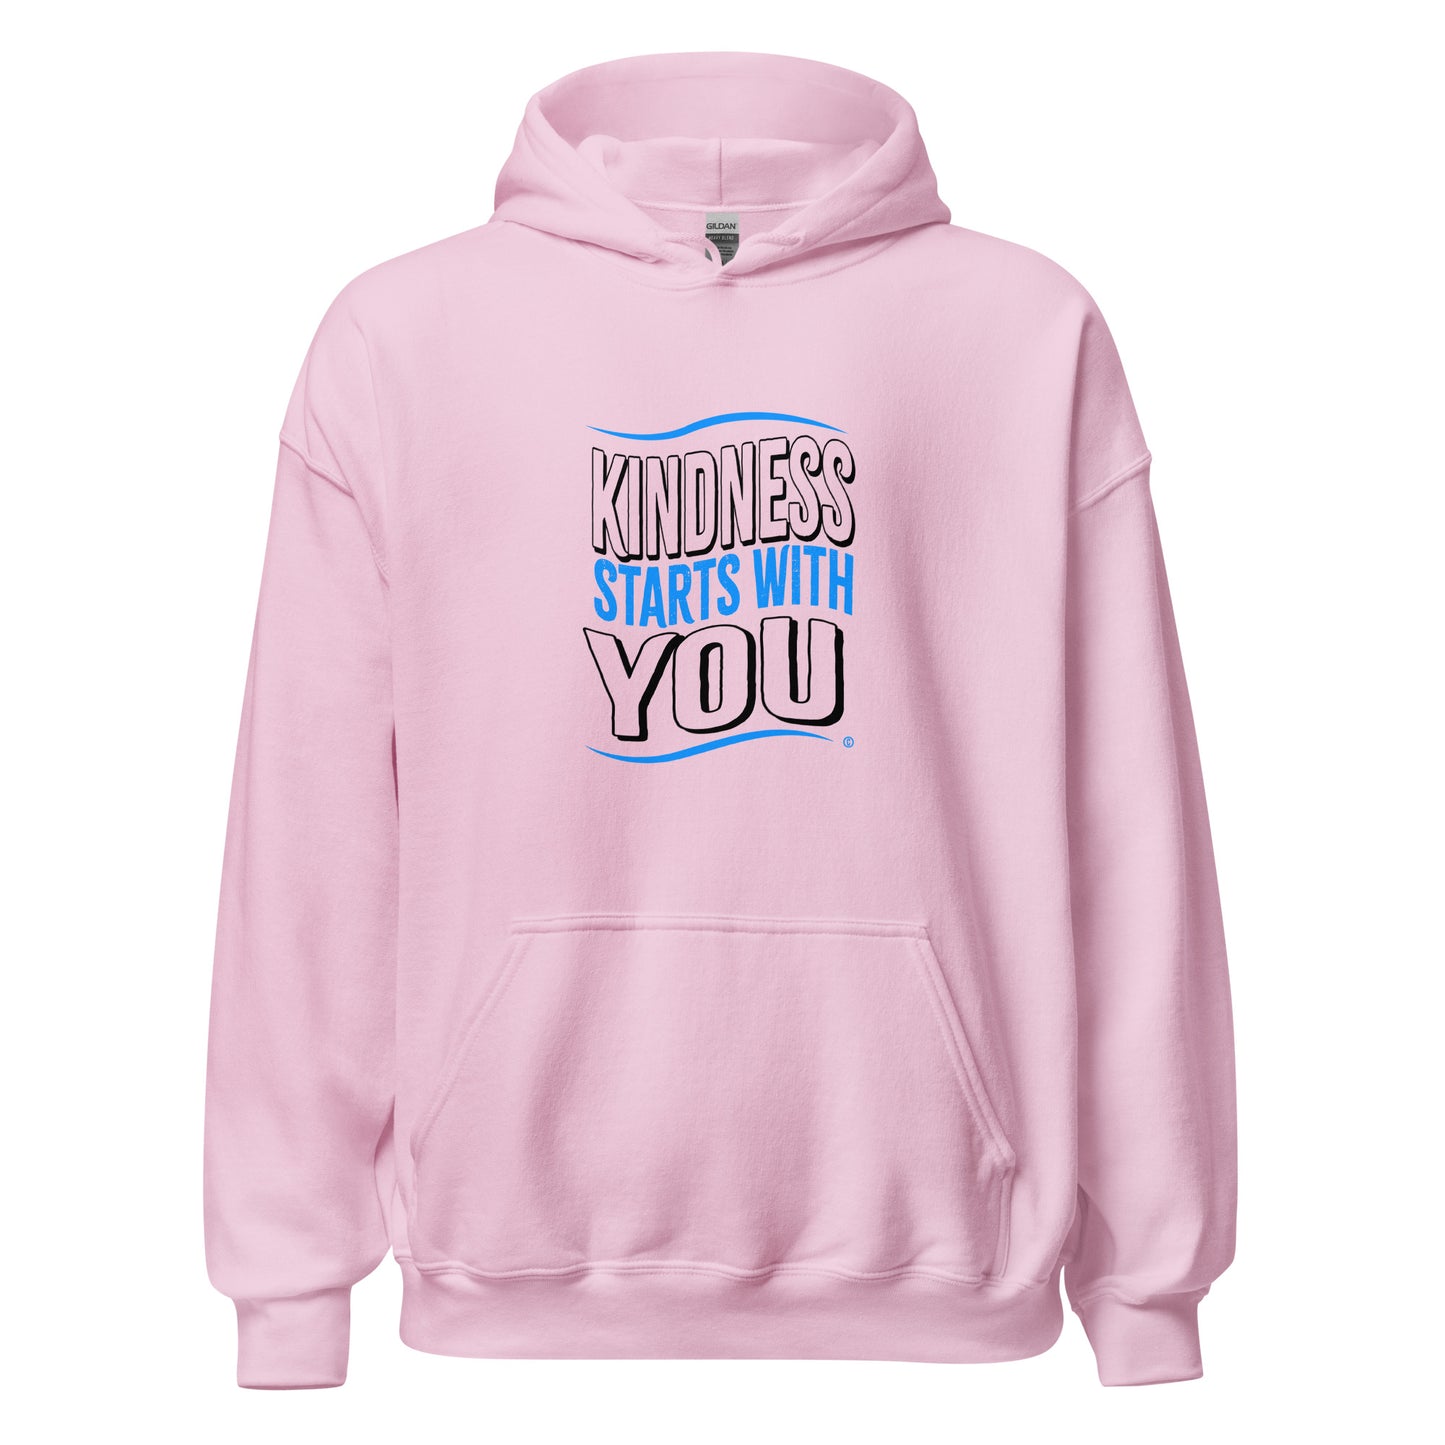 Kindness Starts with You Unisex Hoodies